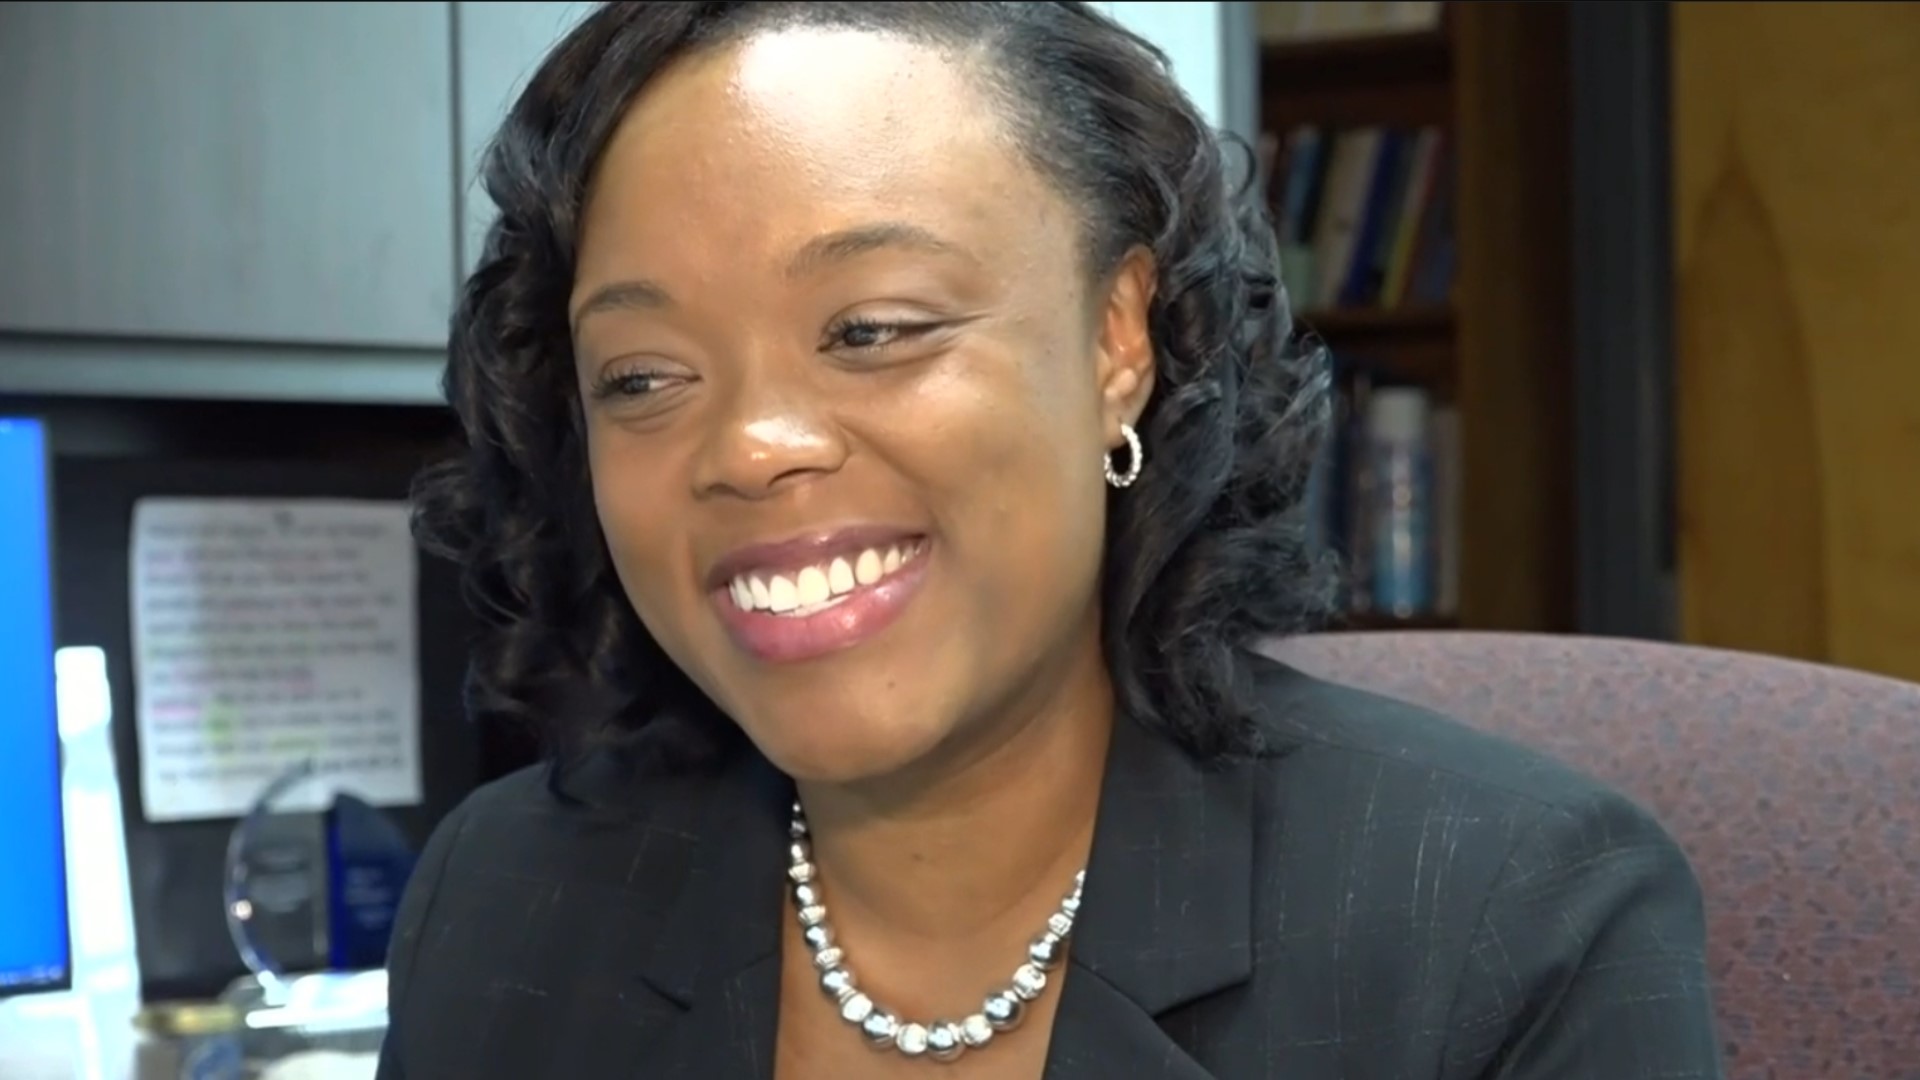 Georgia Schools Superintendent Leads District She Graduated From